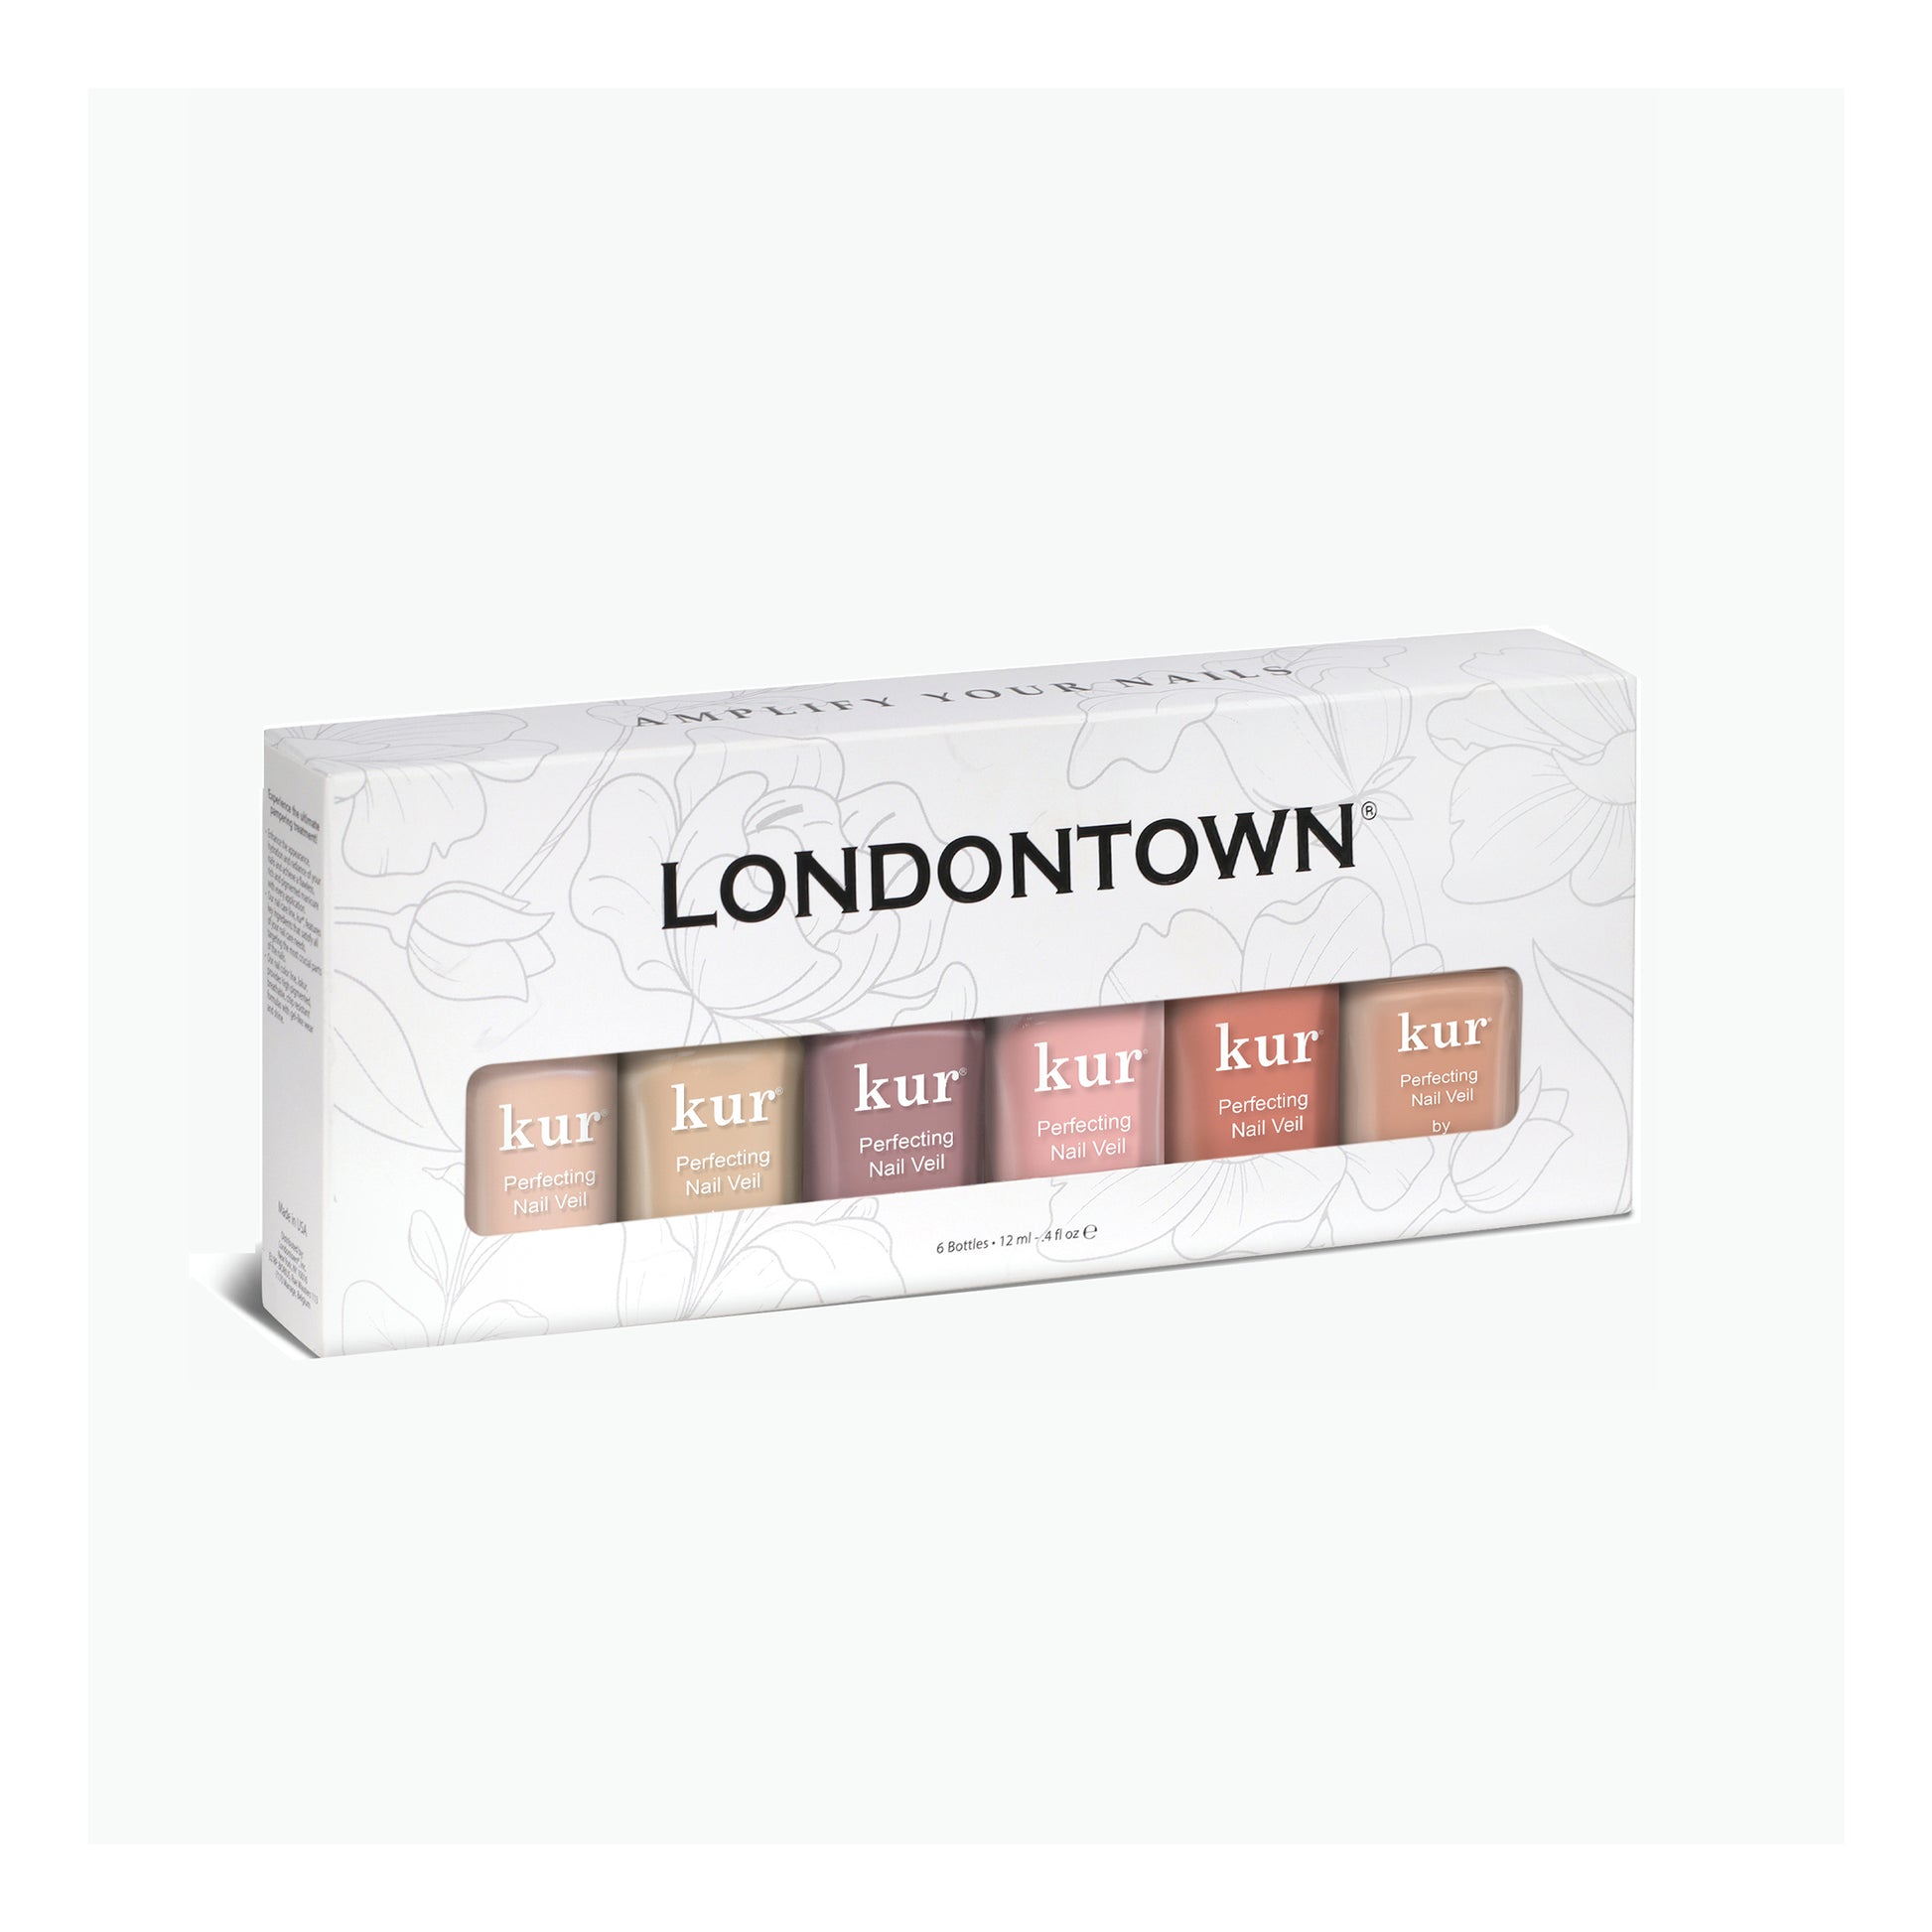 LONDONTOWN-Perfecting-Nail-Veil-Collection